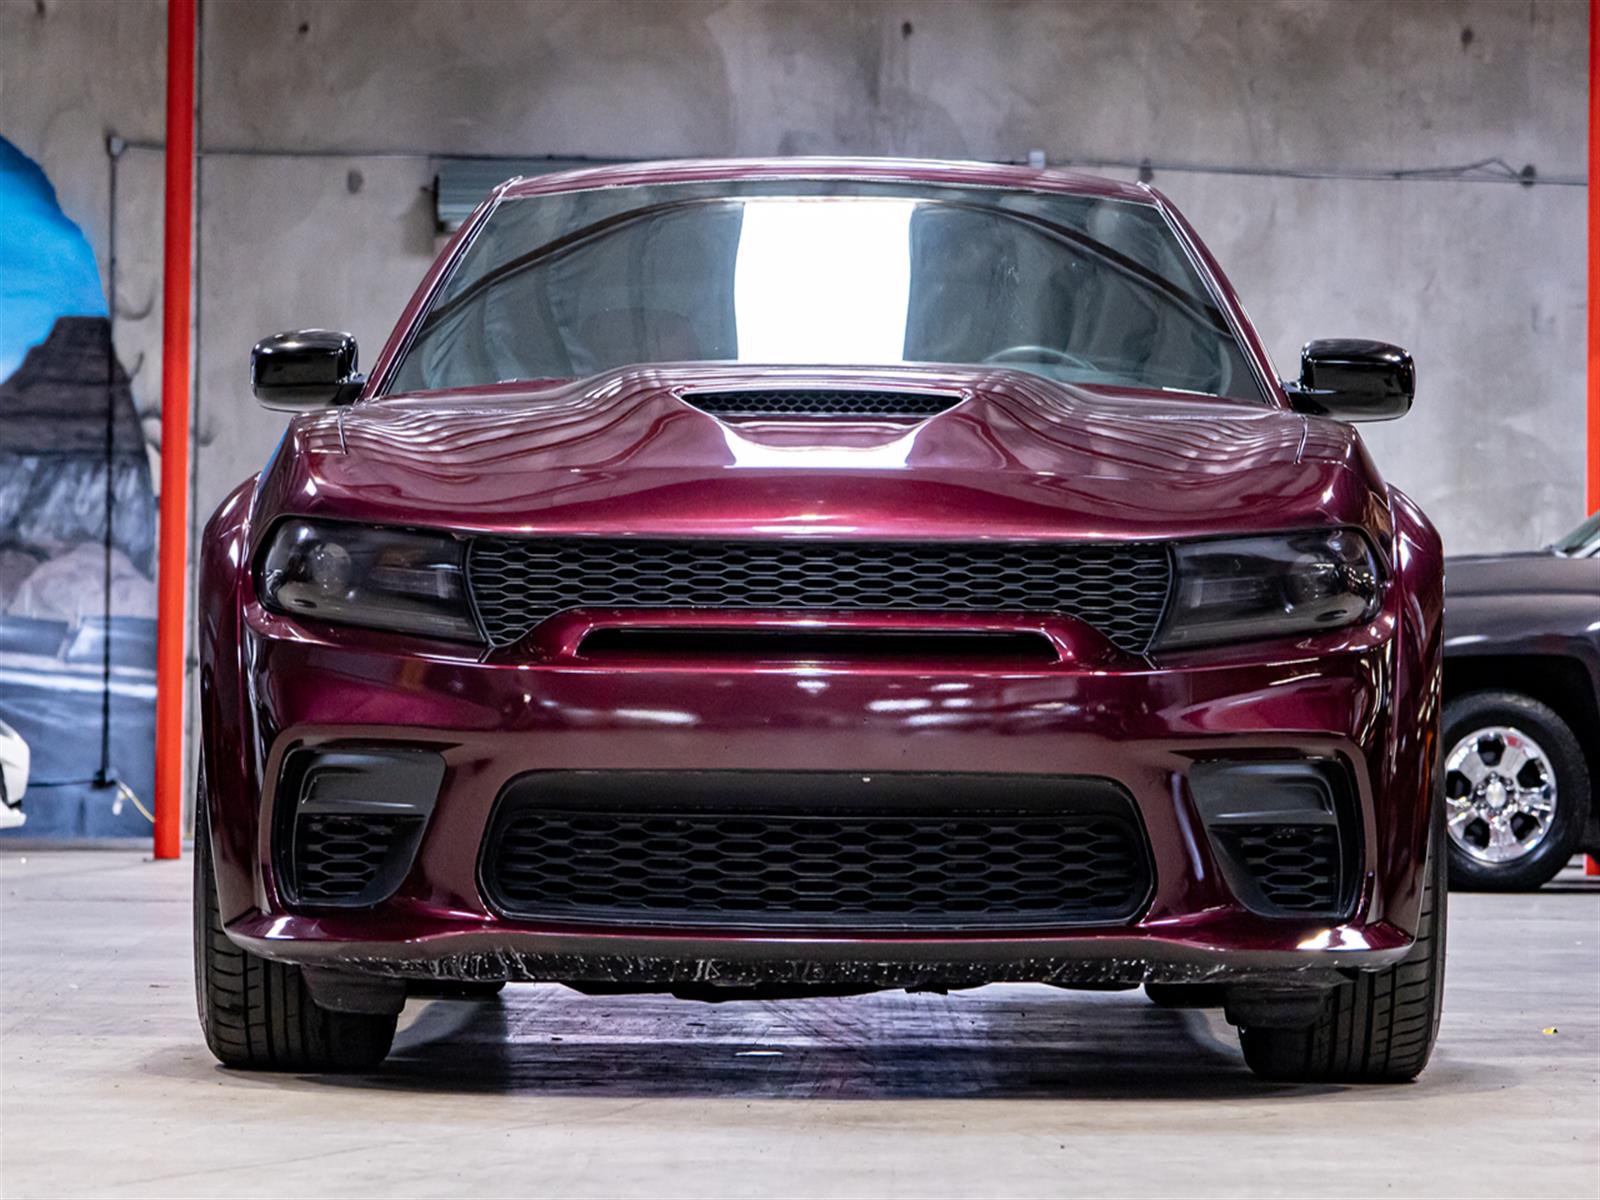  2019 Dodge Charger R/T Car